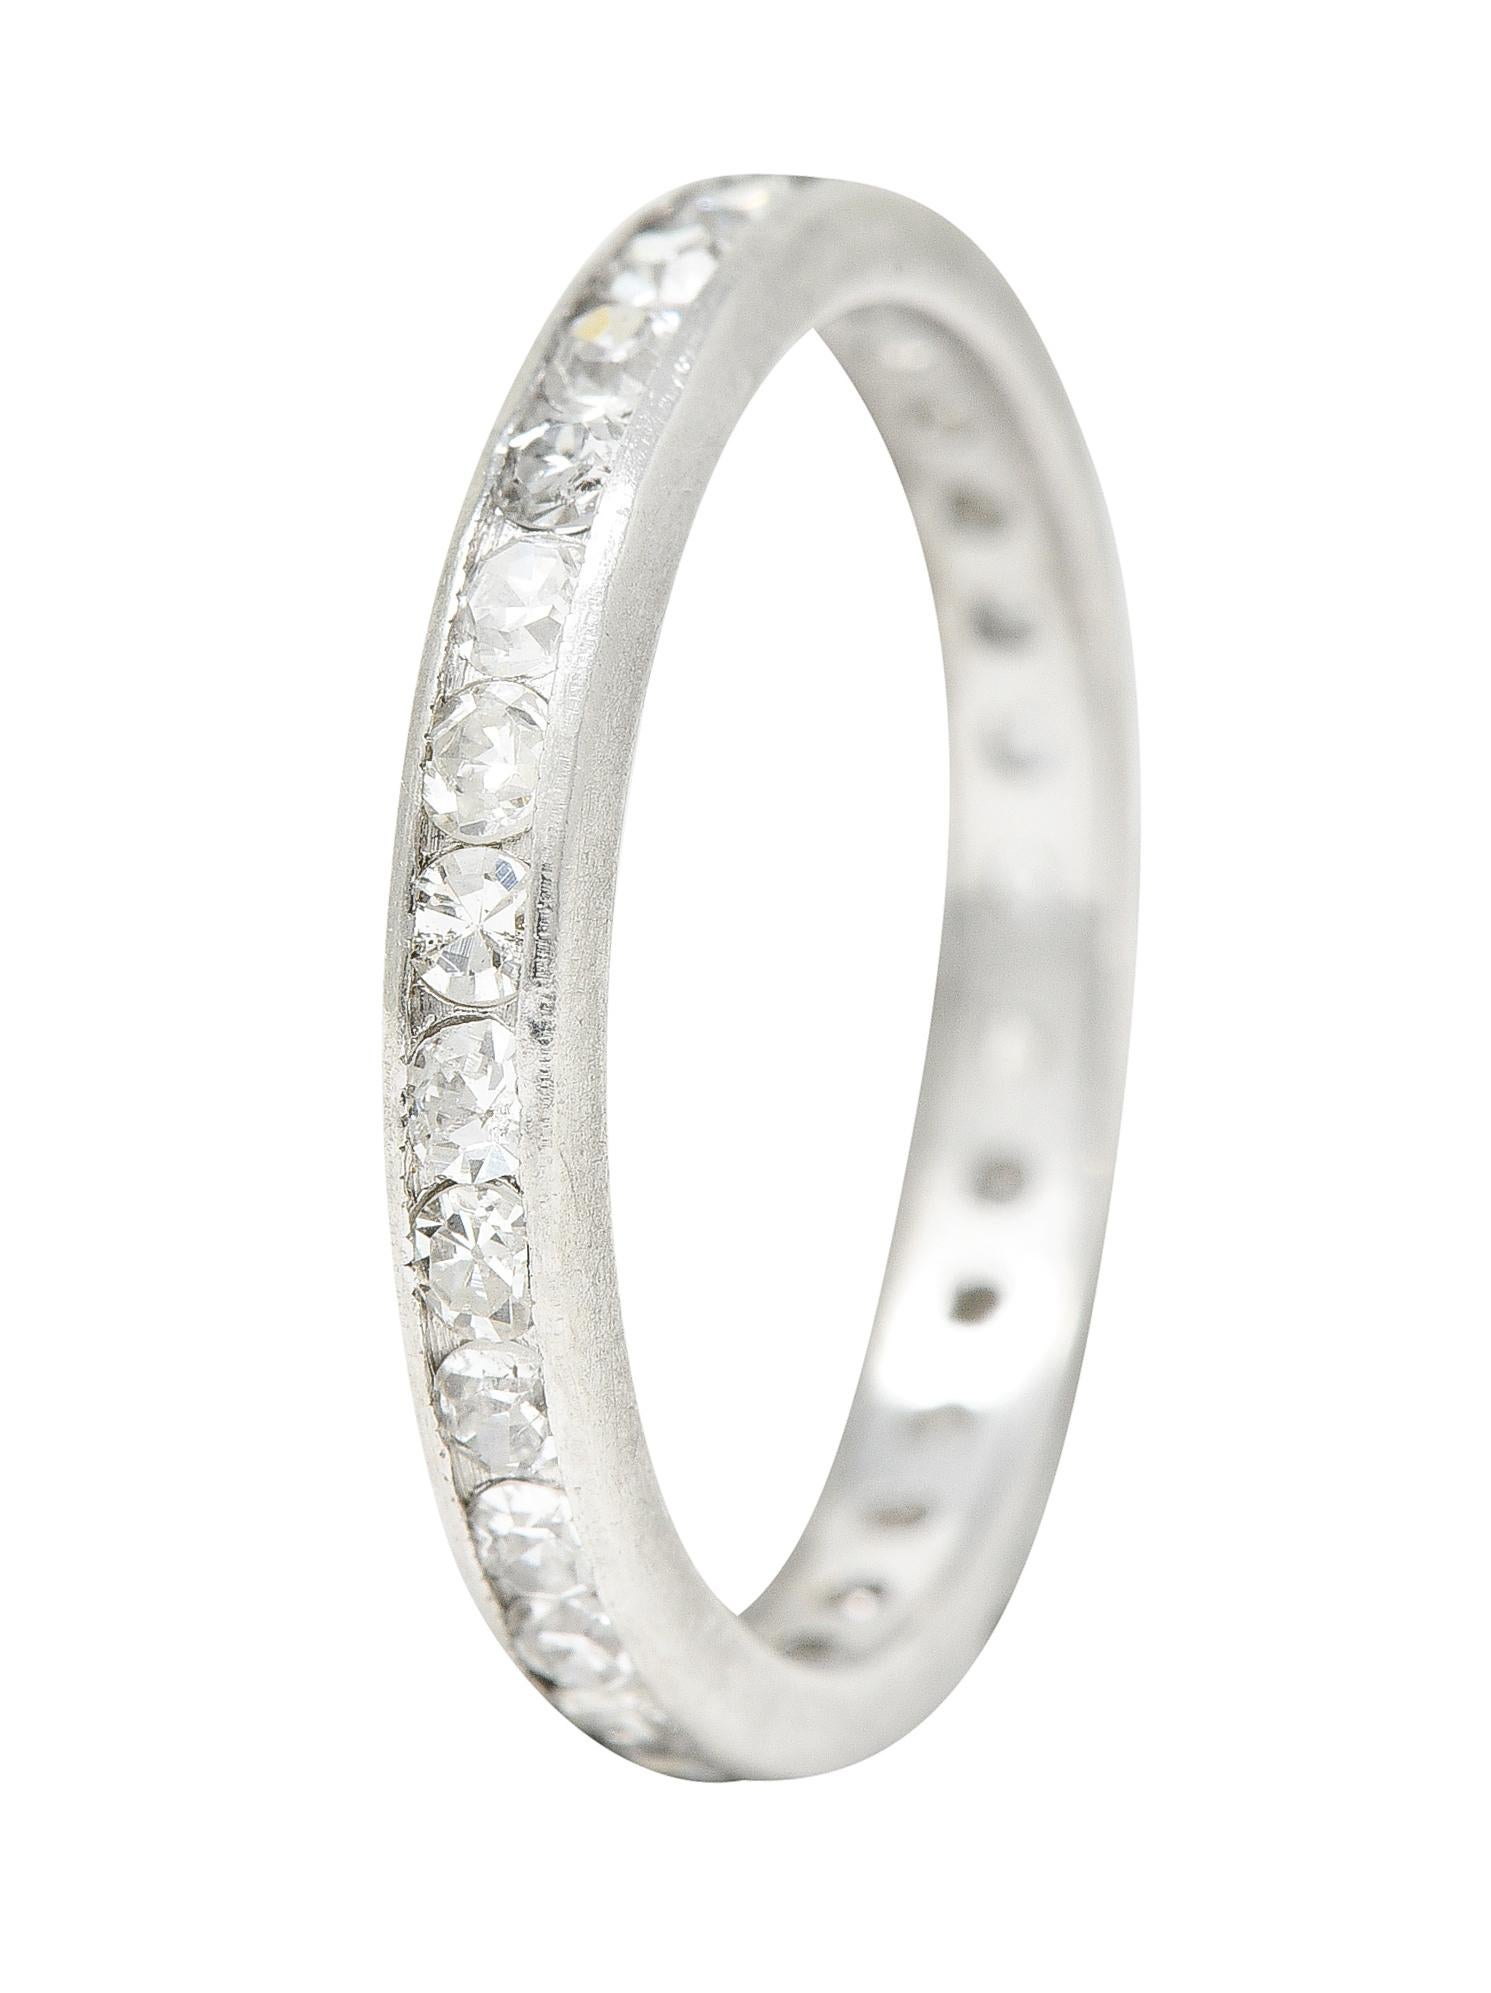 Eternity band ring is channel set fully around by single cut diamonds. Weighing in total approximately 0.50 carat - G/H color with SI clarity. Tested as platinum. Circa: 1930s. Ring Size: 4 1/2 & sizable. Measures: North to South 2.5 mm and sits 1.5